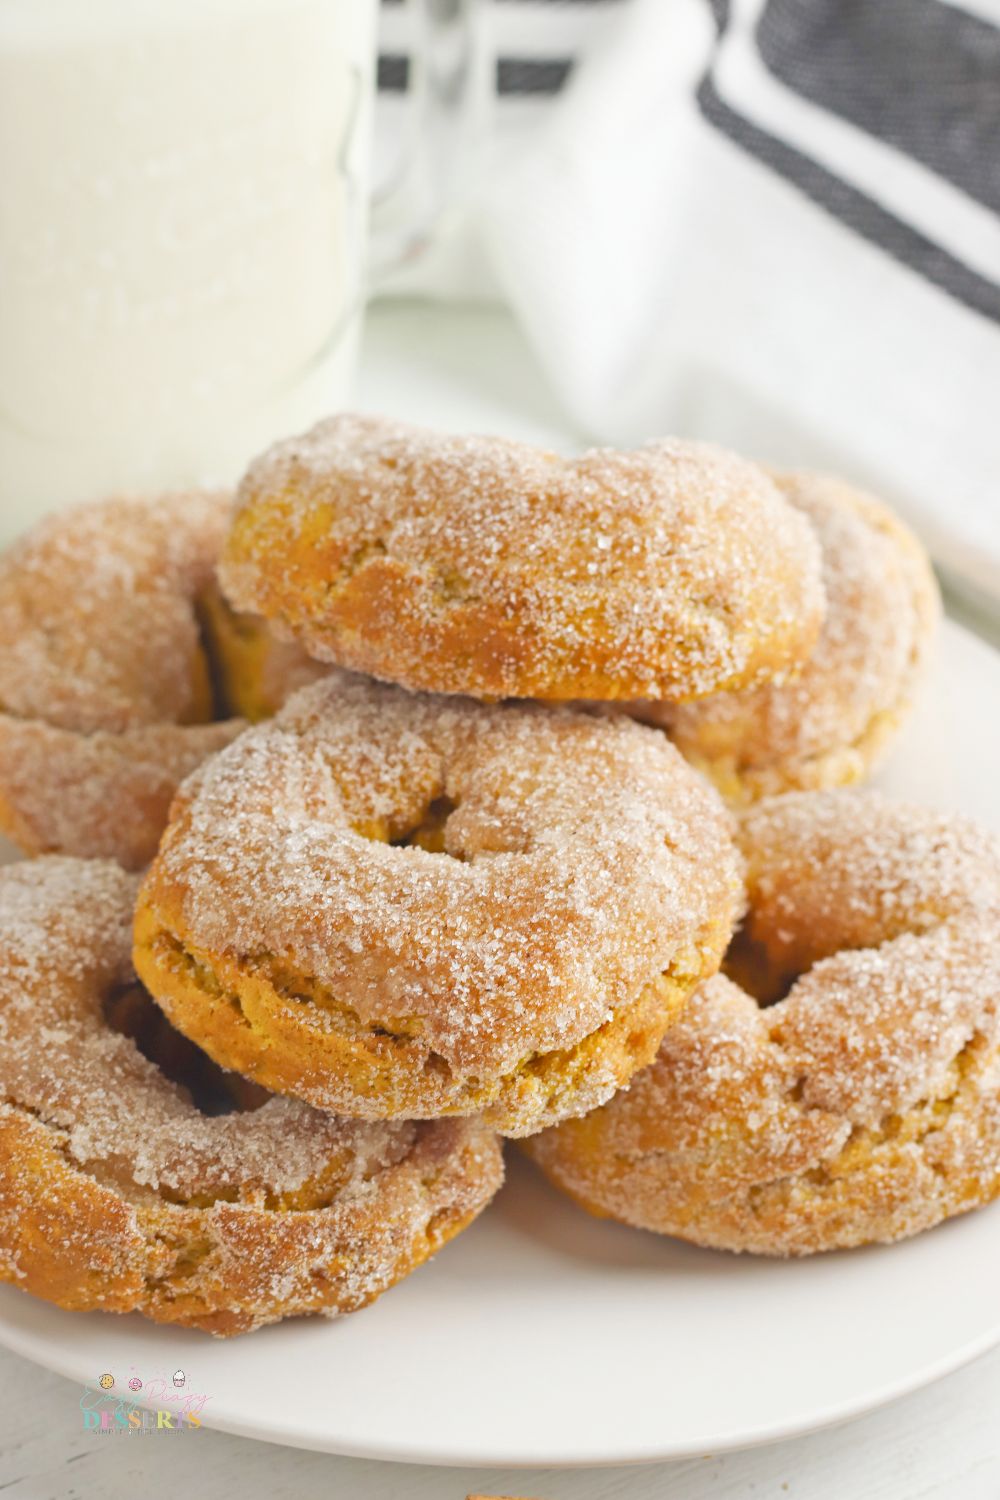 Air fryer pumpkin donuts on a white serving plate next to a glass of milk